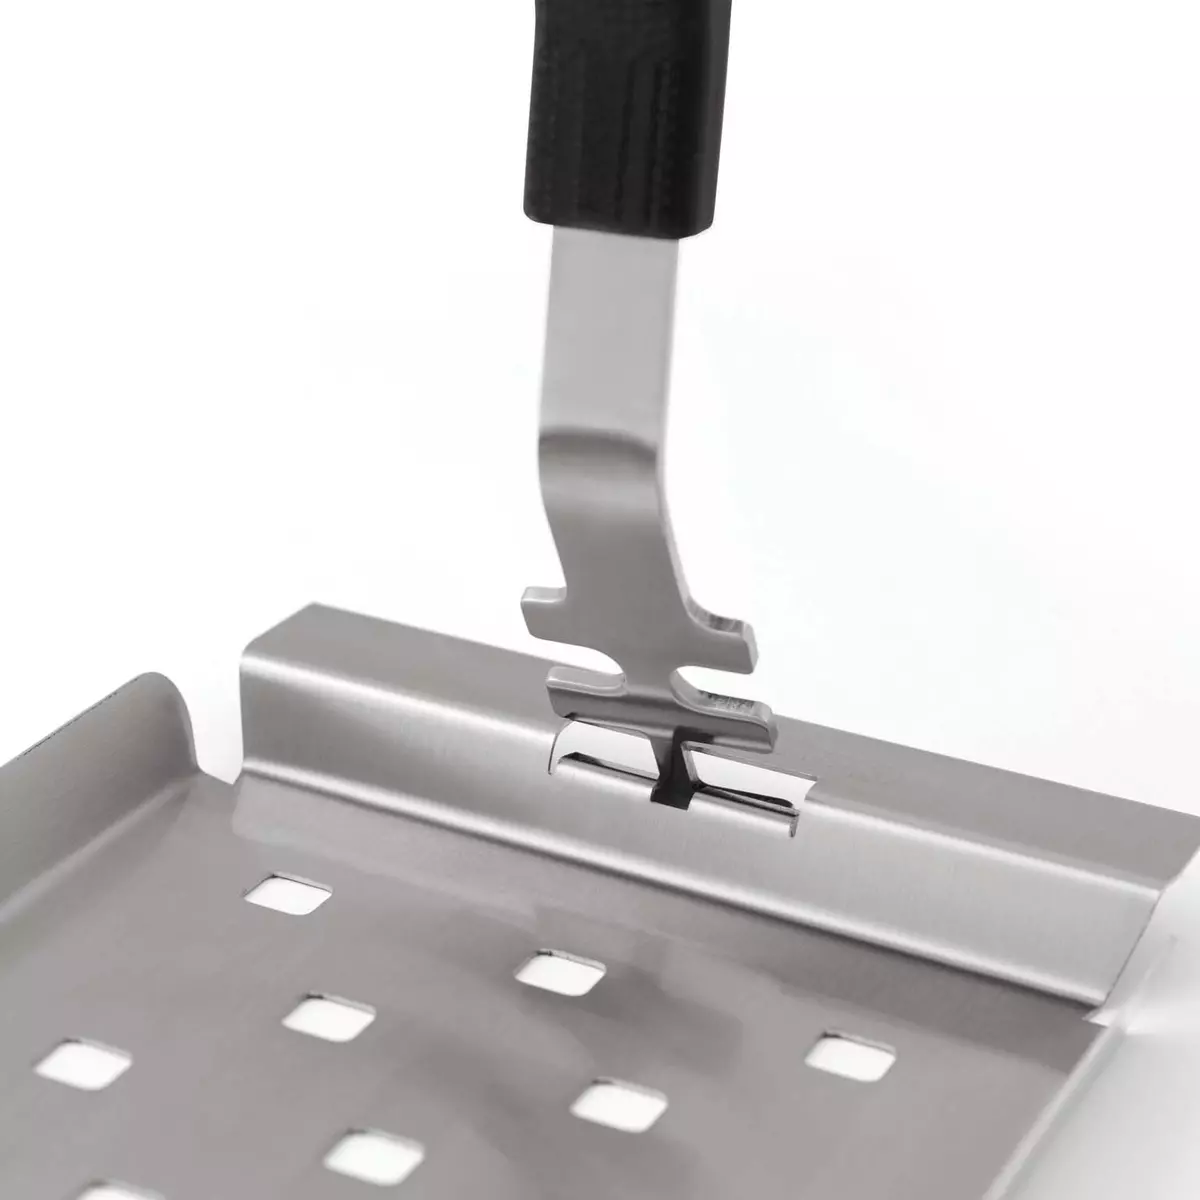 Broil King Grid Lifter - image 1